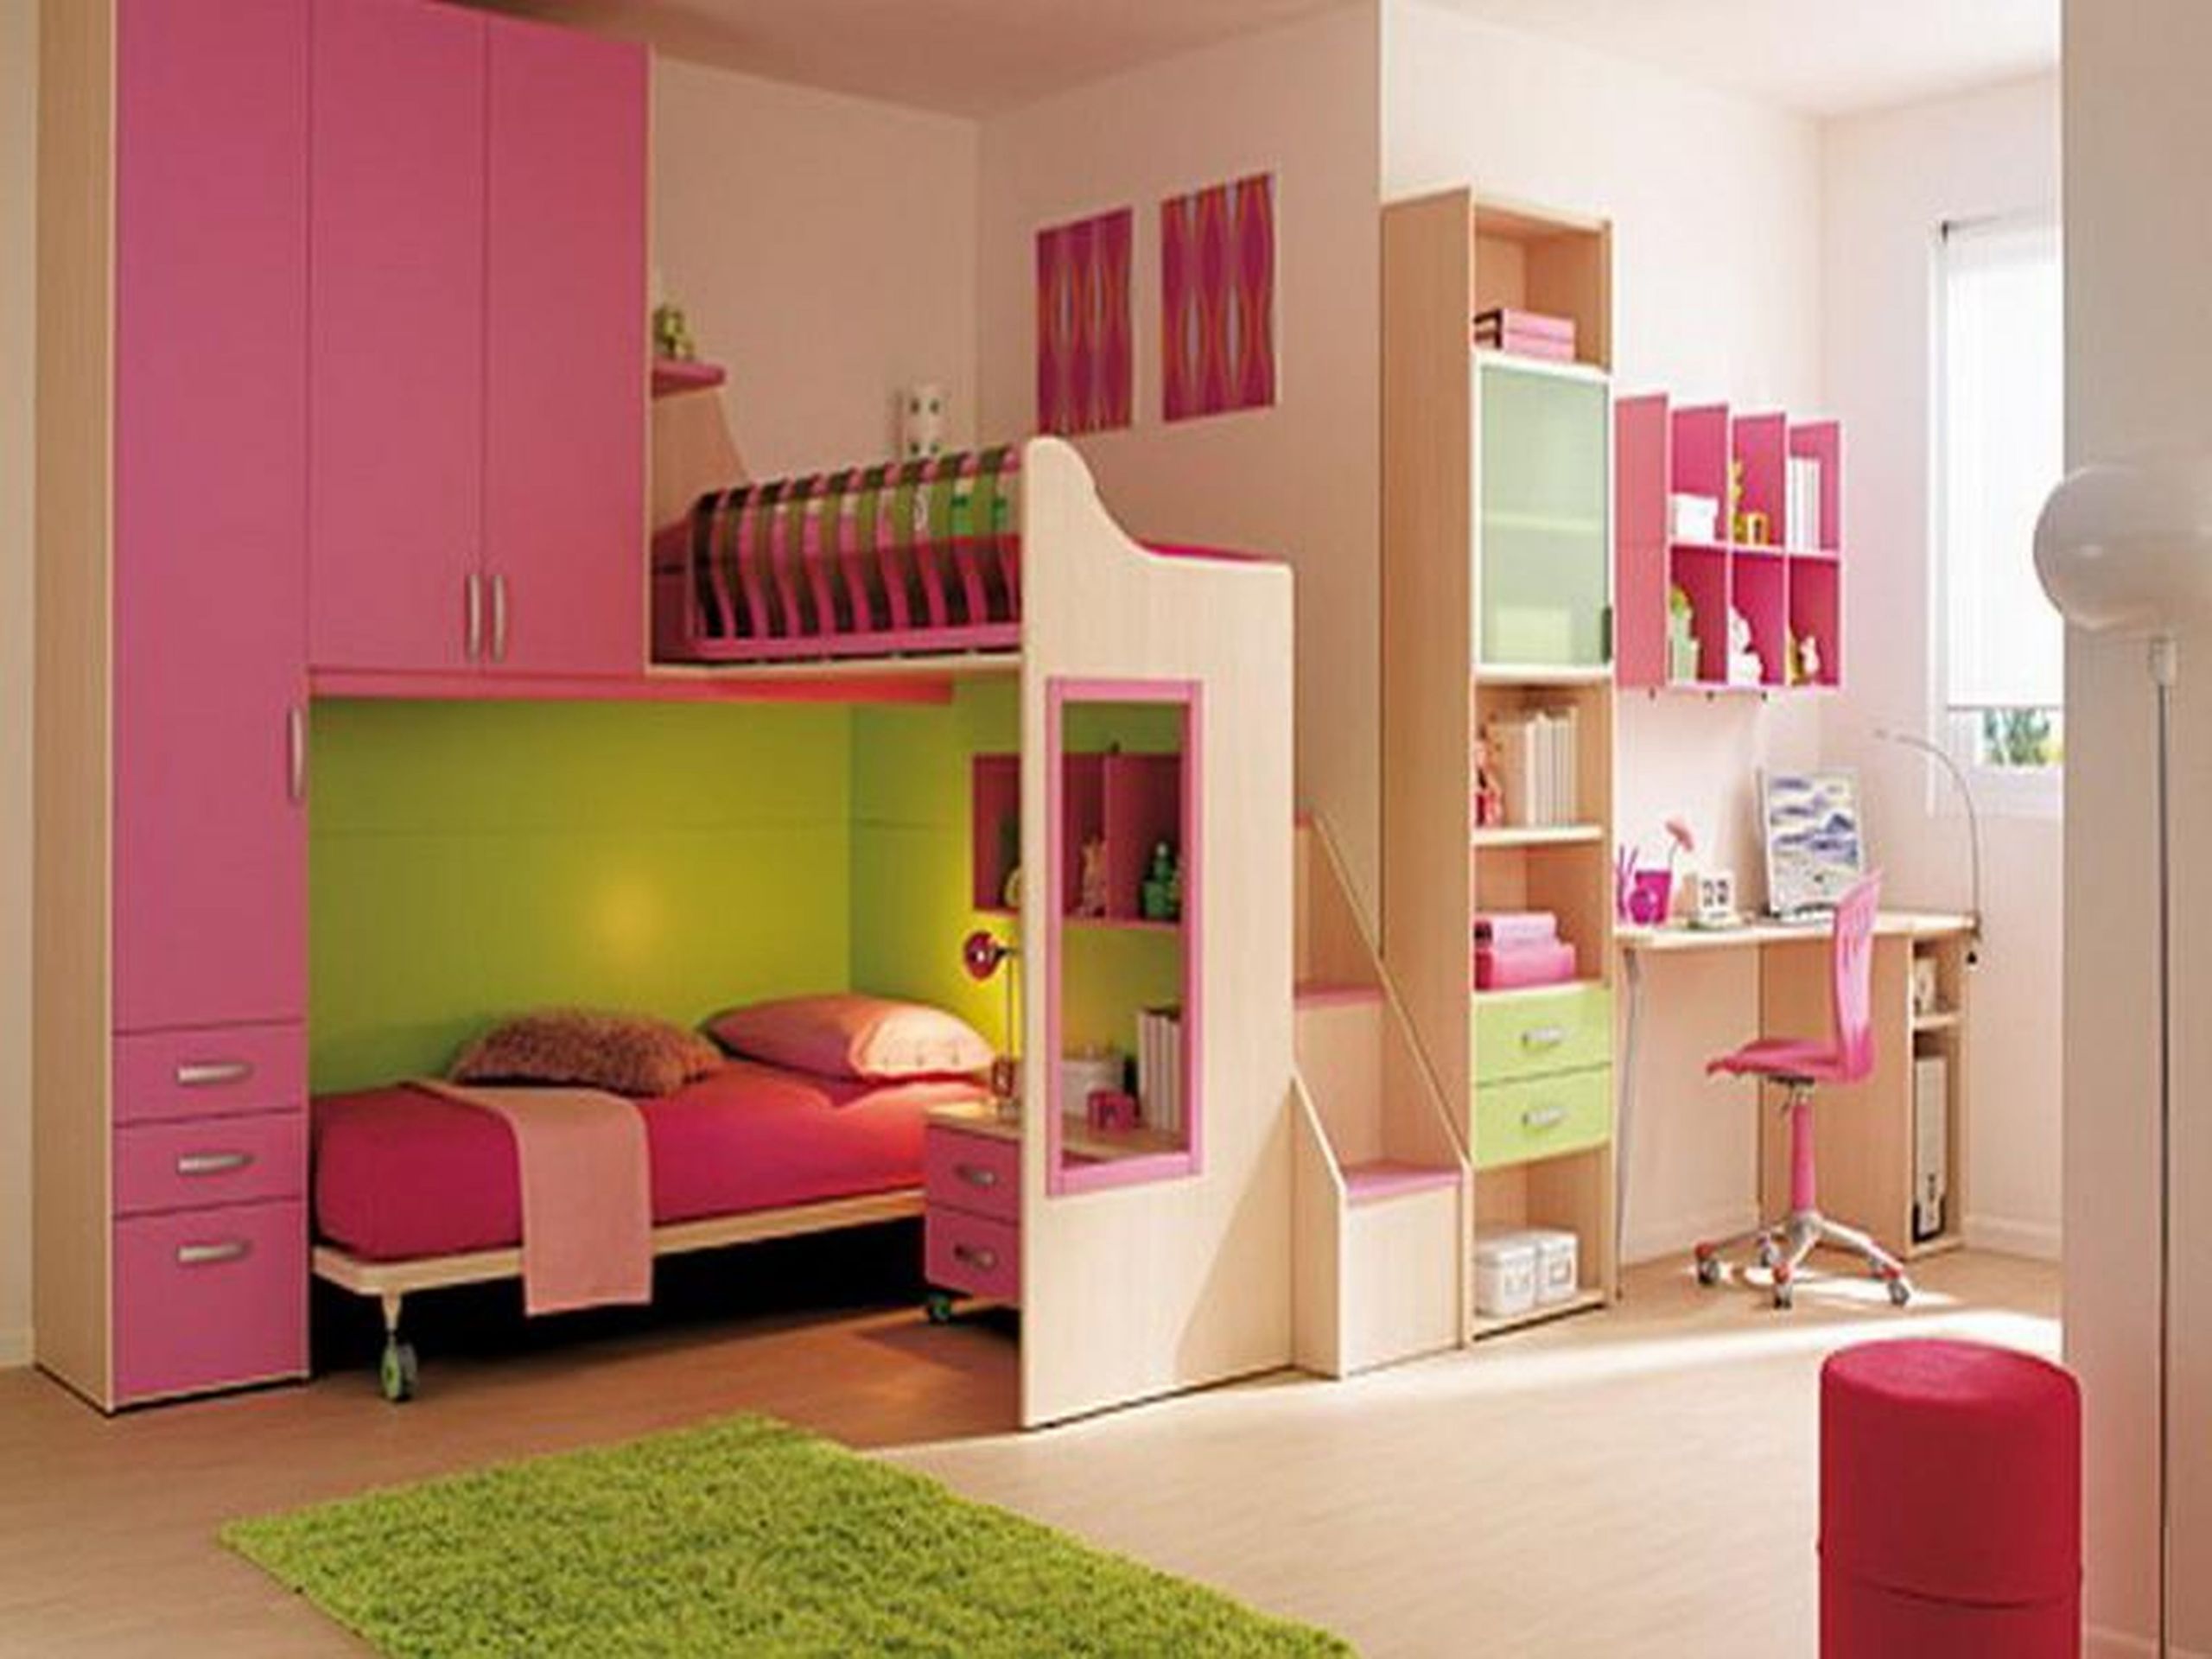 Storage Ideas For Kids Room
 DIY Storage Ideas For Kids Room Crafts To Do With Kids